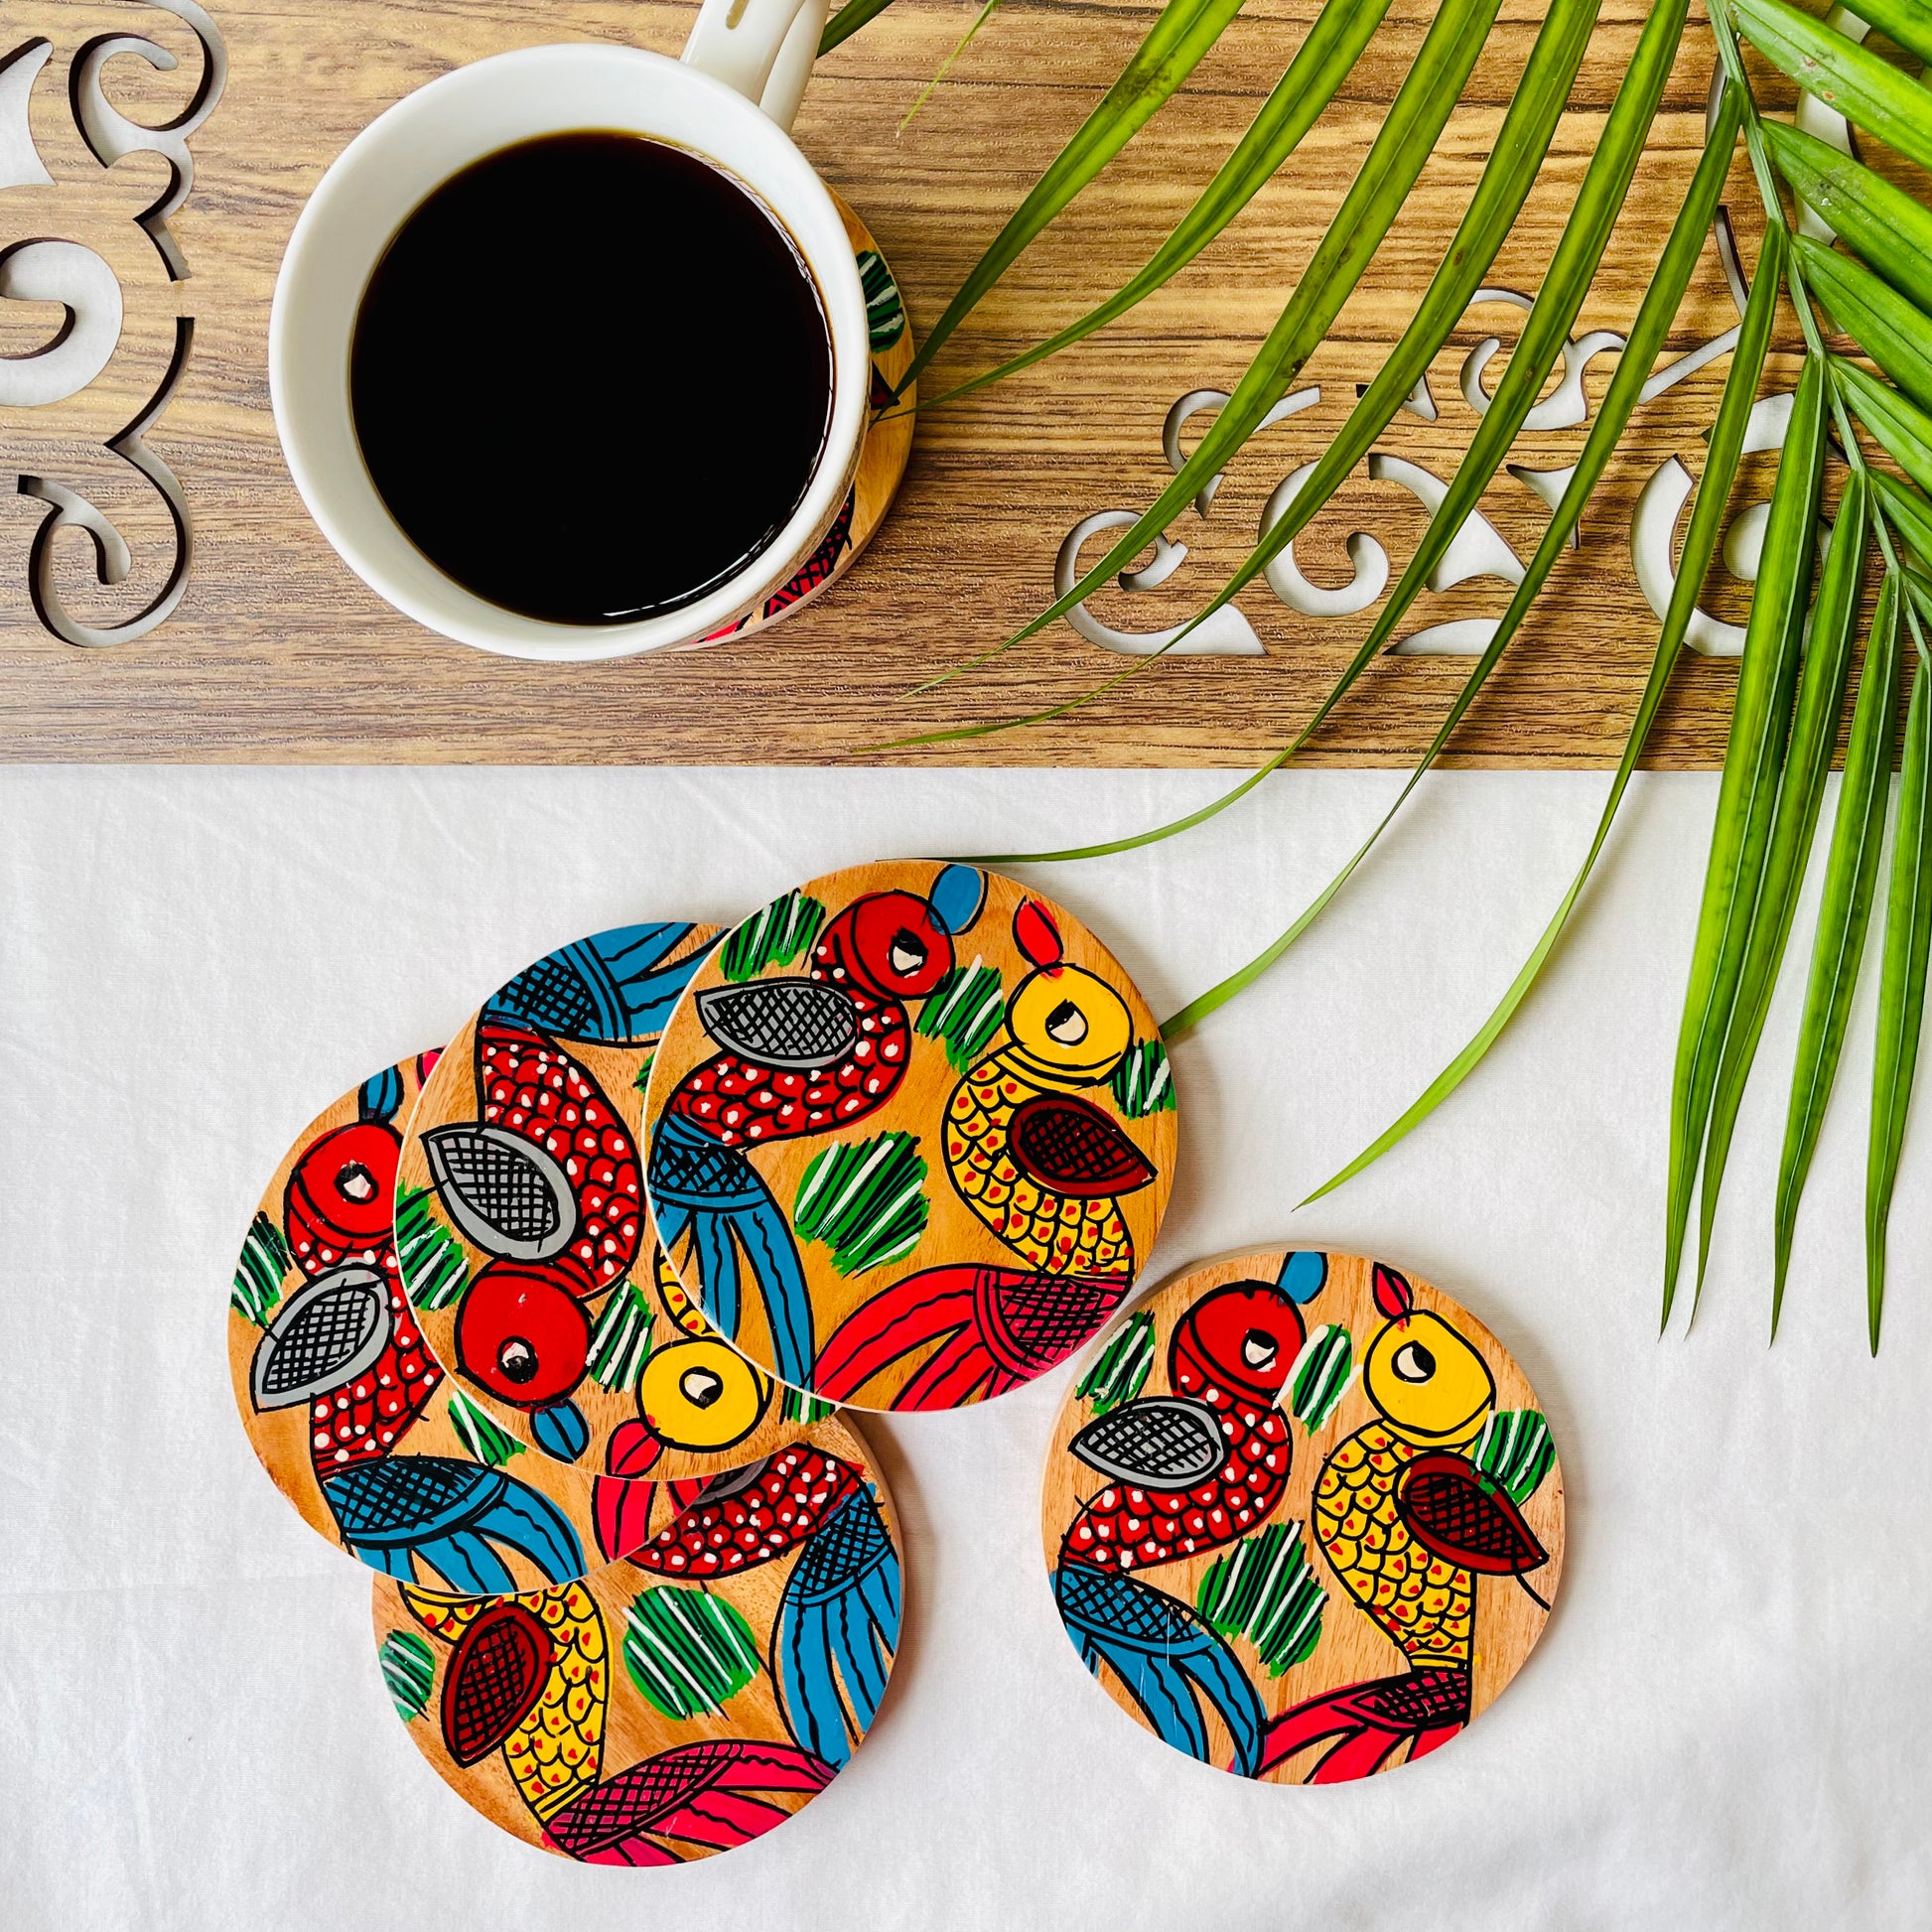 Five pure mango wood round wood coasters painted with one yellow bird with red feathers and a beak and one red with blue feathers and a beak along with some leaf in each wood coaster are placed near a teacup-filled with black tea with leaves in the background